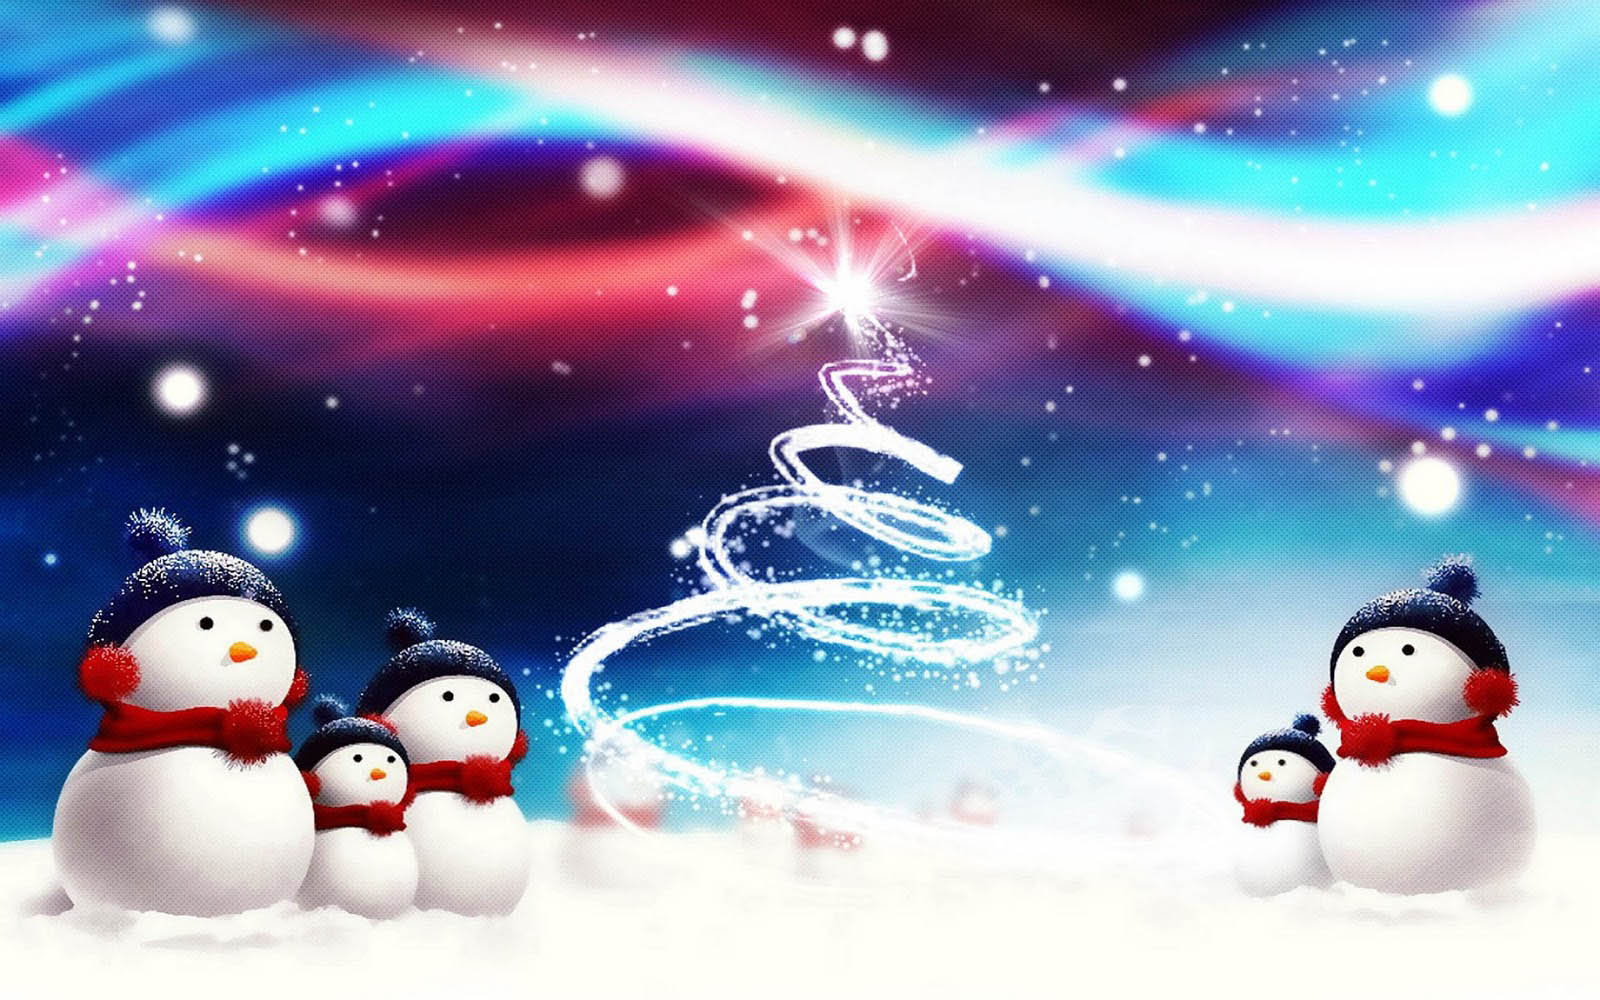 Snowman Background Wallpaper Photos Pictures And Image For